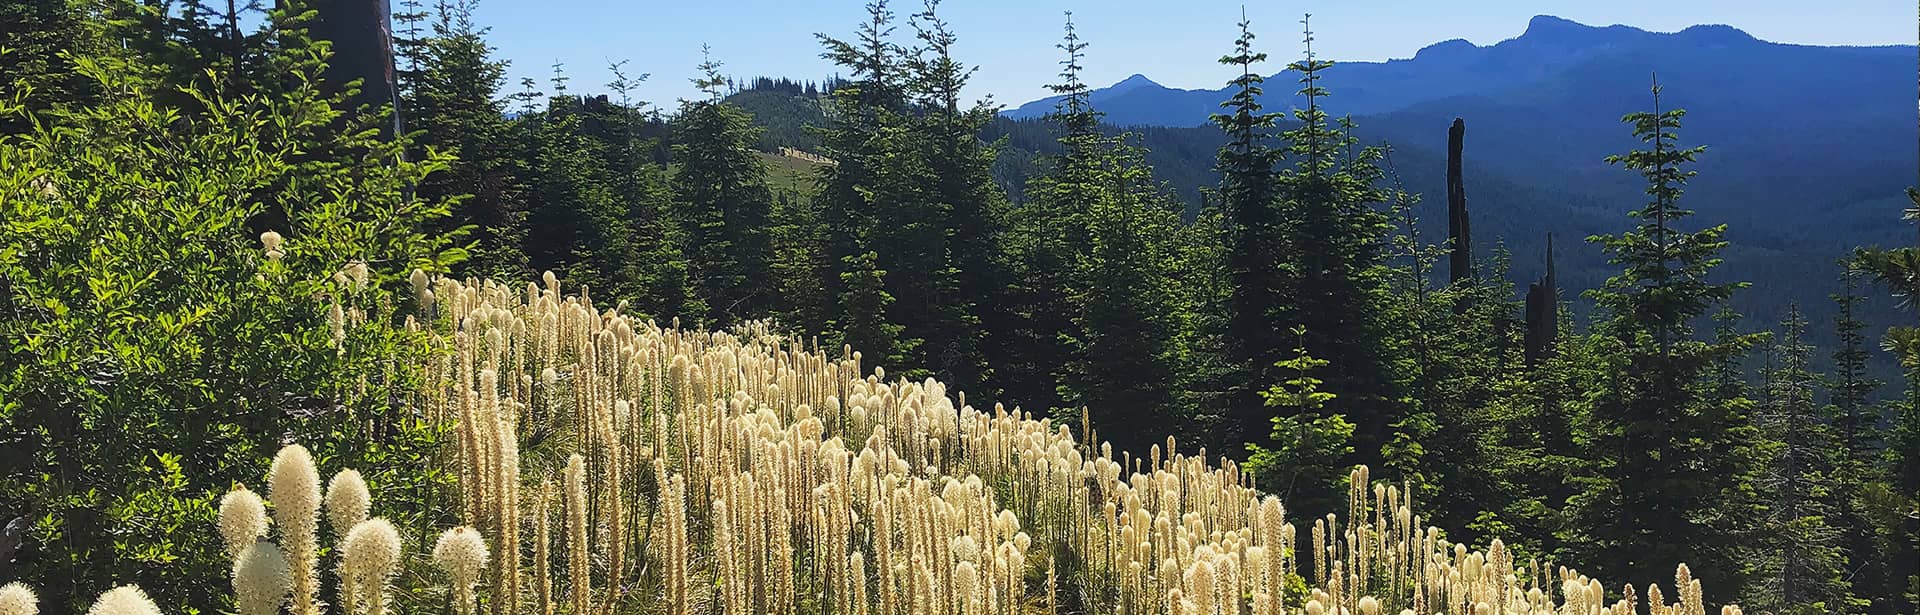 A photo of Bear grass with pines and mountains in the background